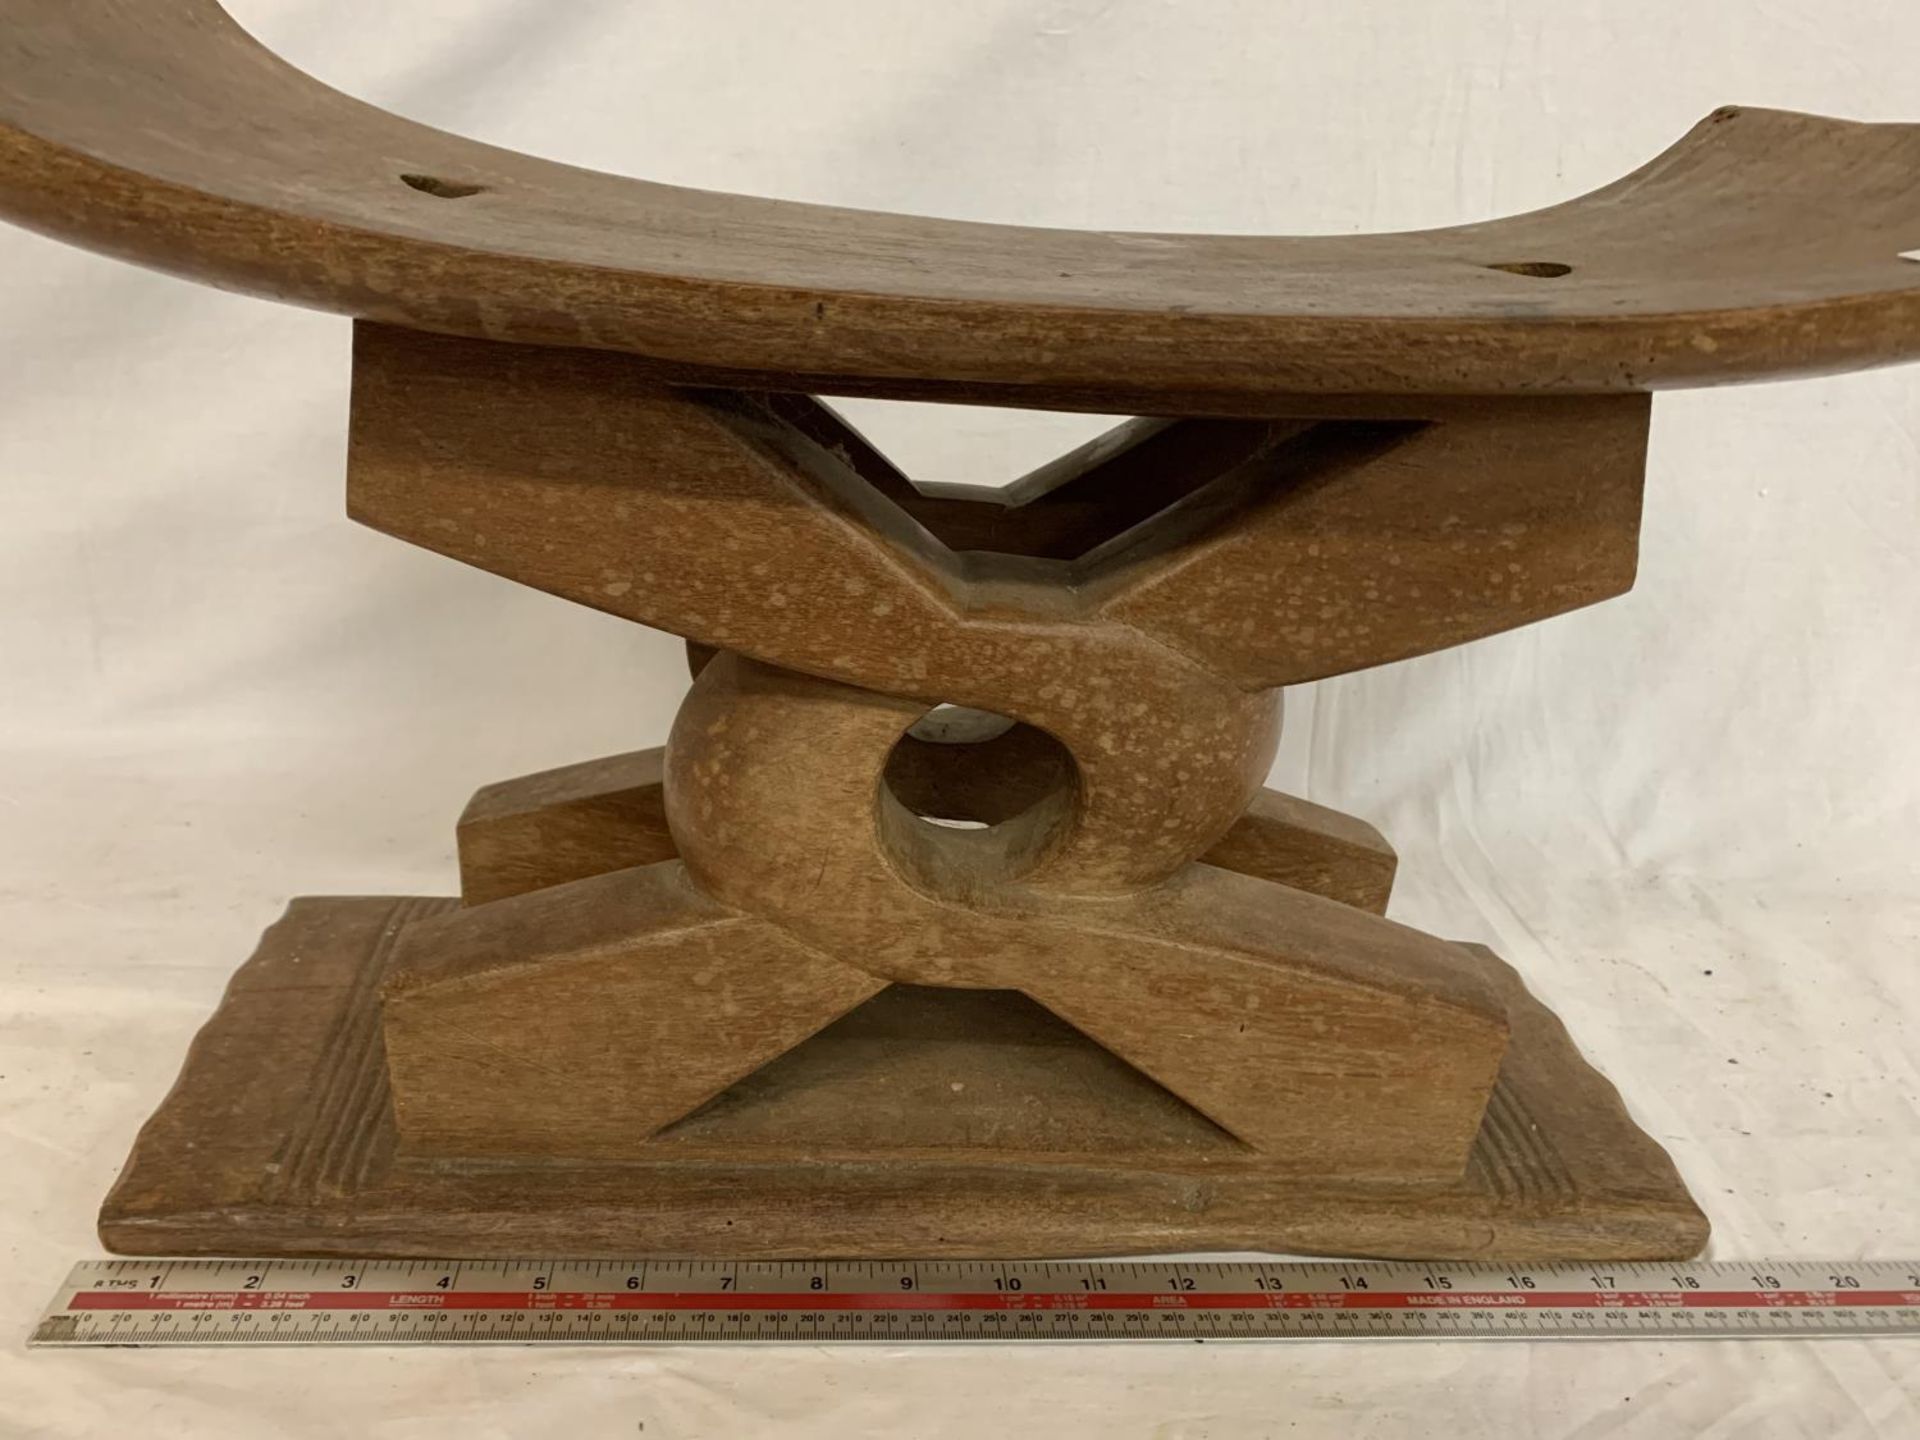 AN ORIENTAL WOODEN STOOL WITH CURVED SEAT - Image 2 of 5